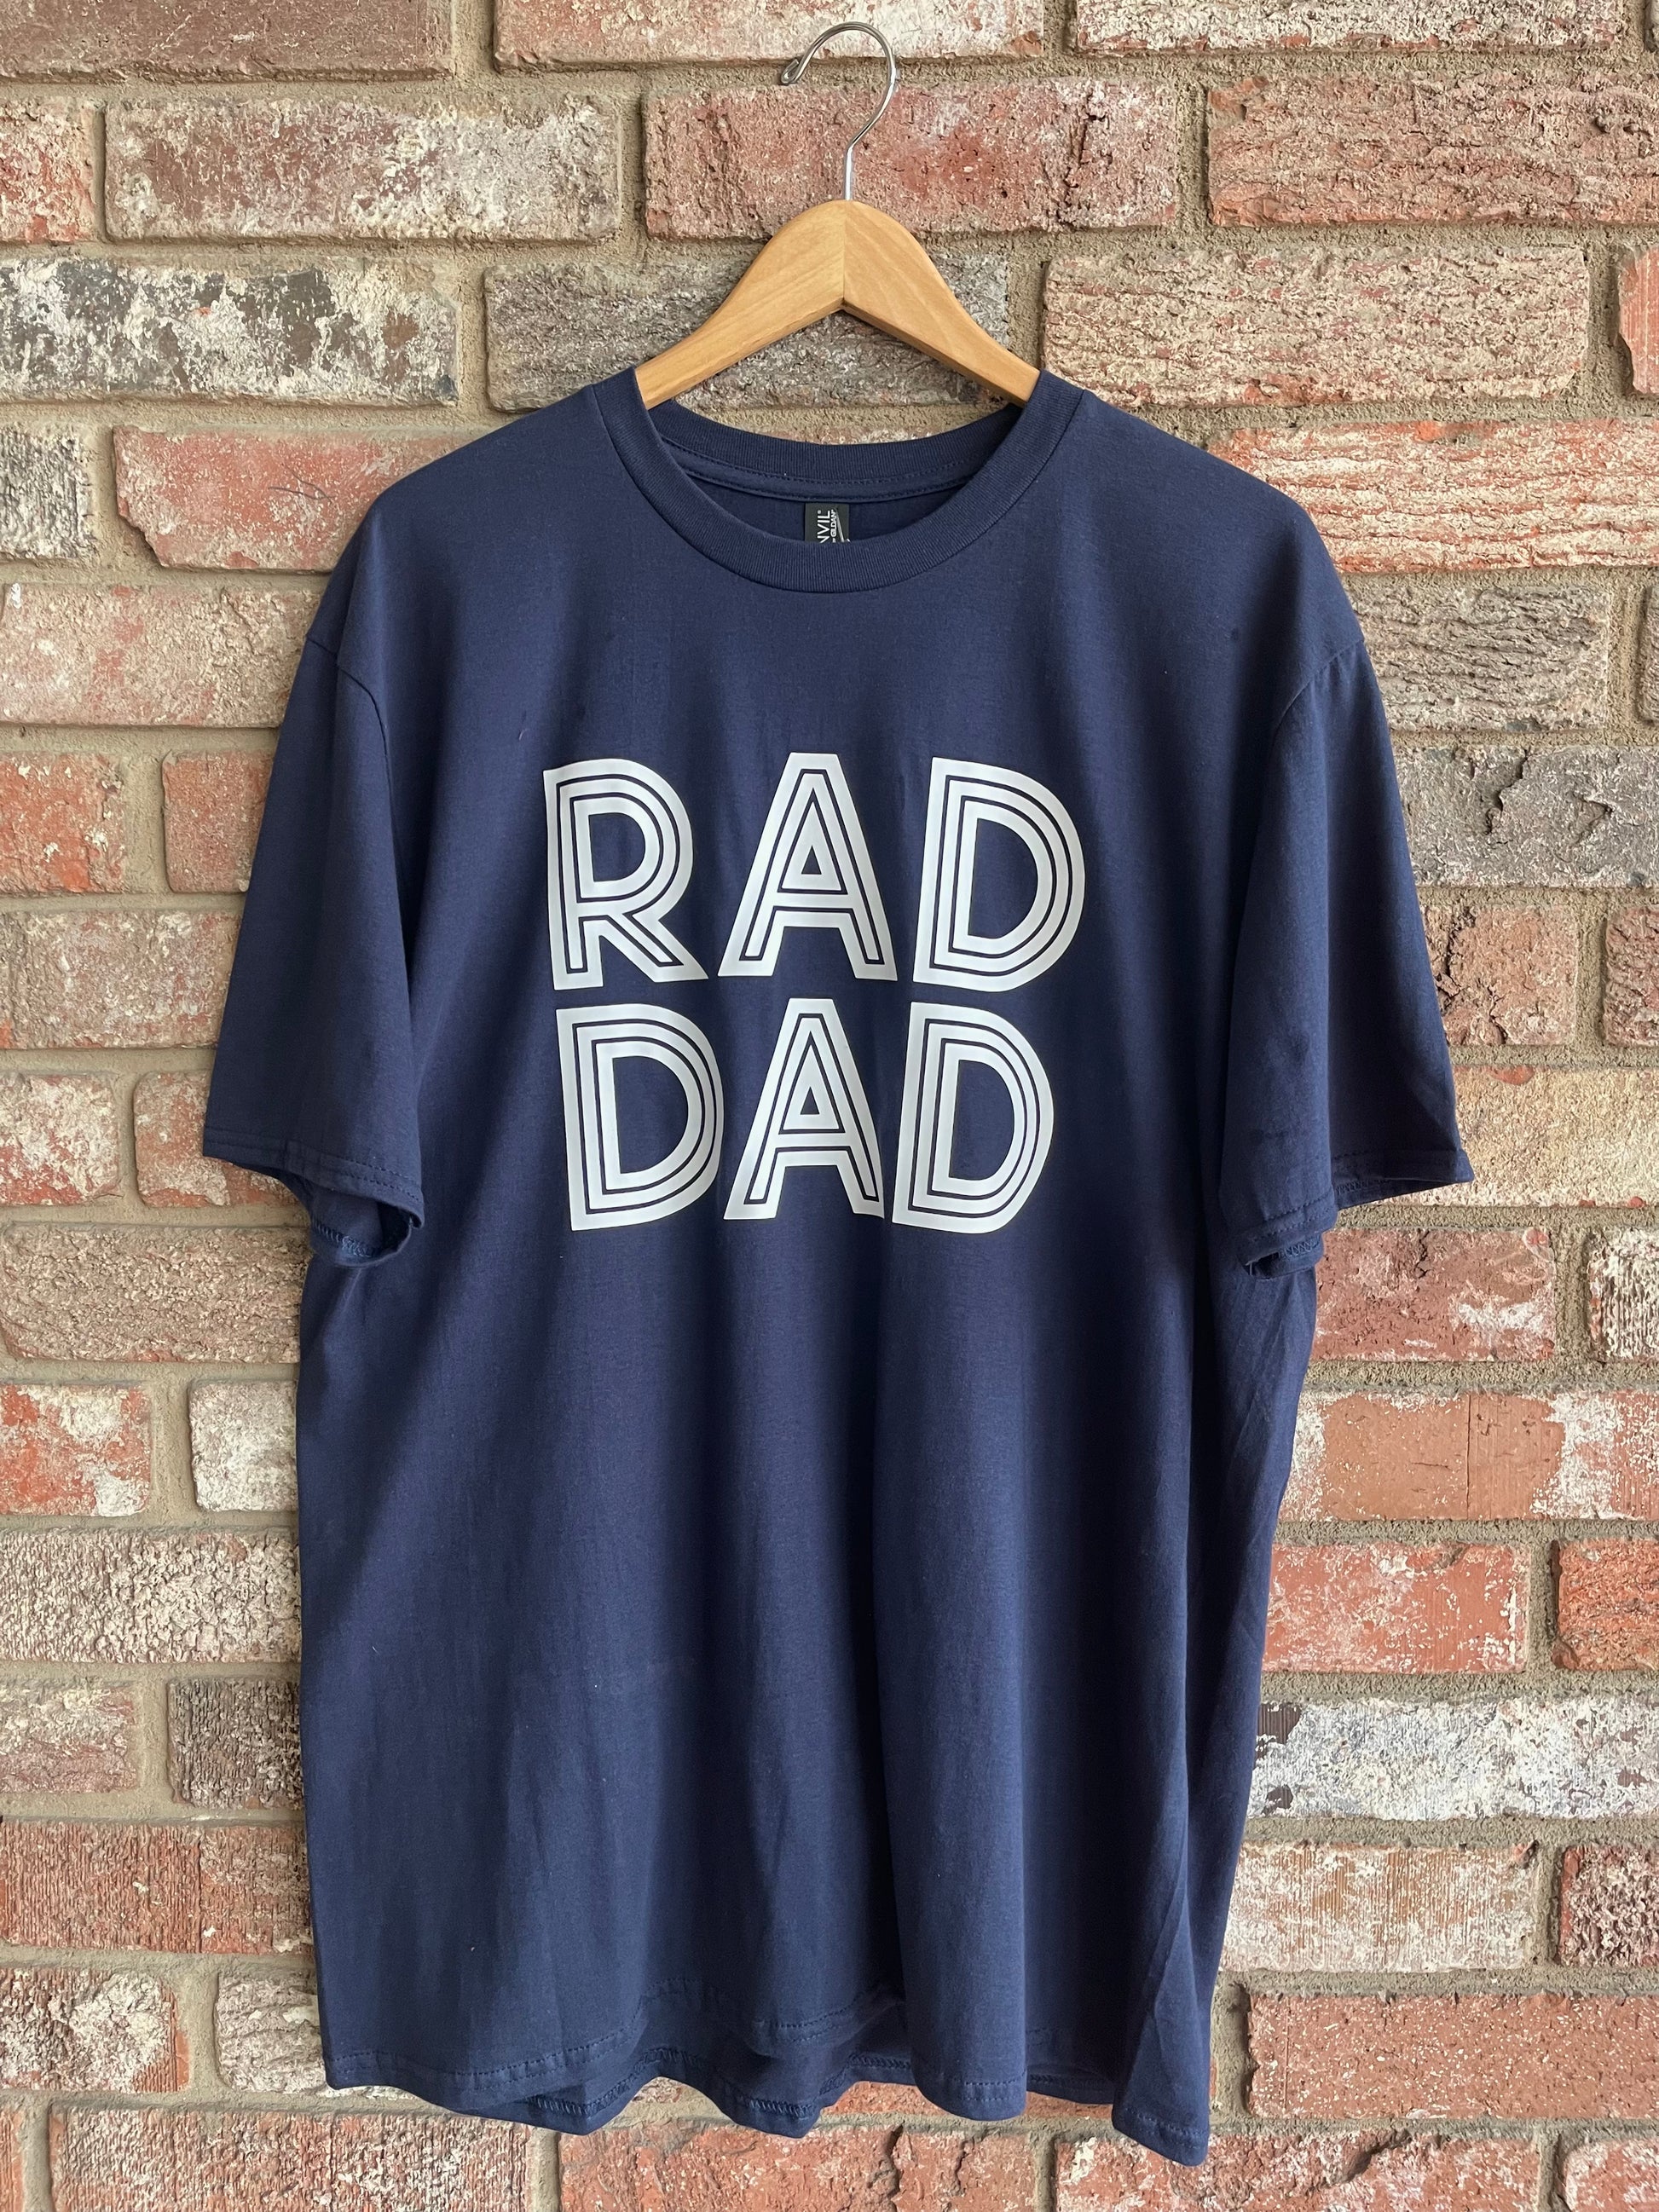 This is a navy blue unisex style tee with lettering, stating, "RAD DAD" on the front. It is a regular fit with a crew neckline. Looking for a fun tee for Father's Day? Look no further!